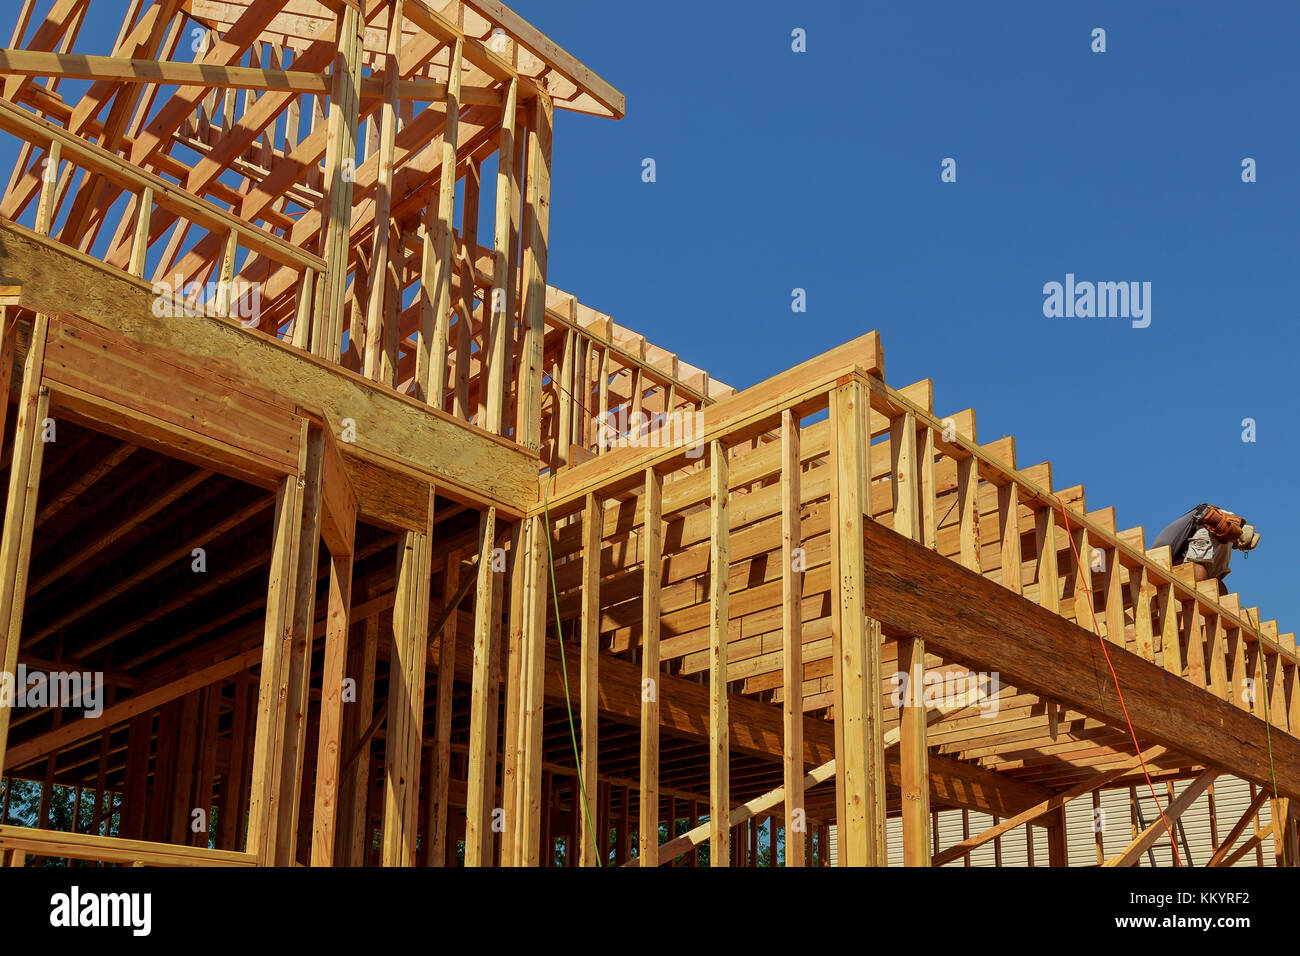 New Construction Wood Home Framing Abstract. New construction home framing Stock Photo